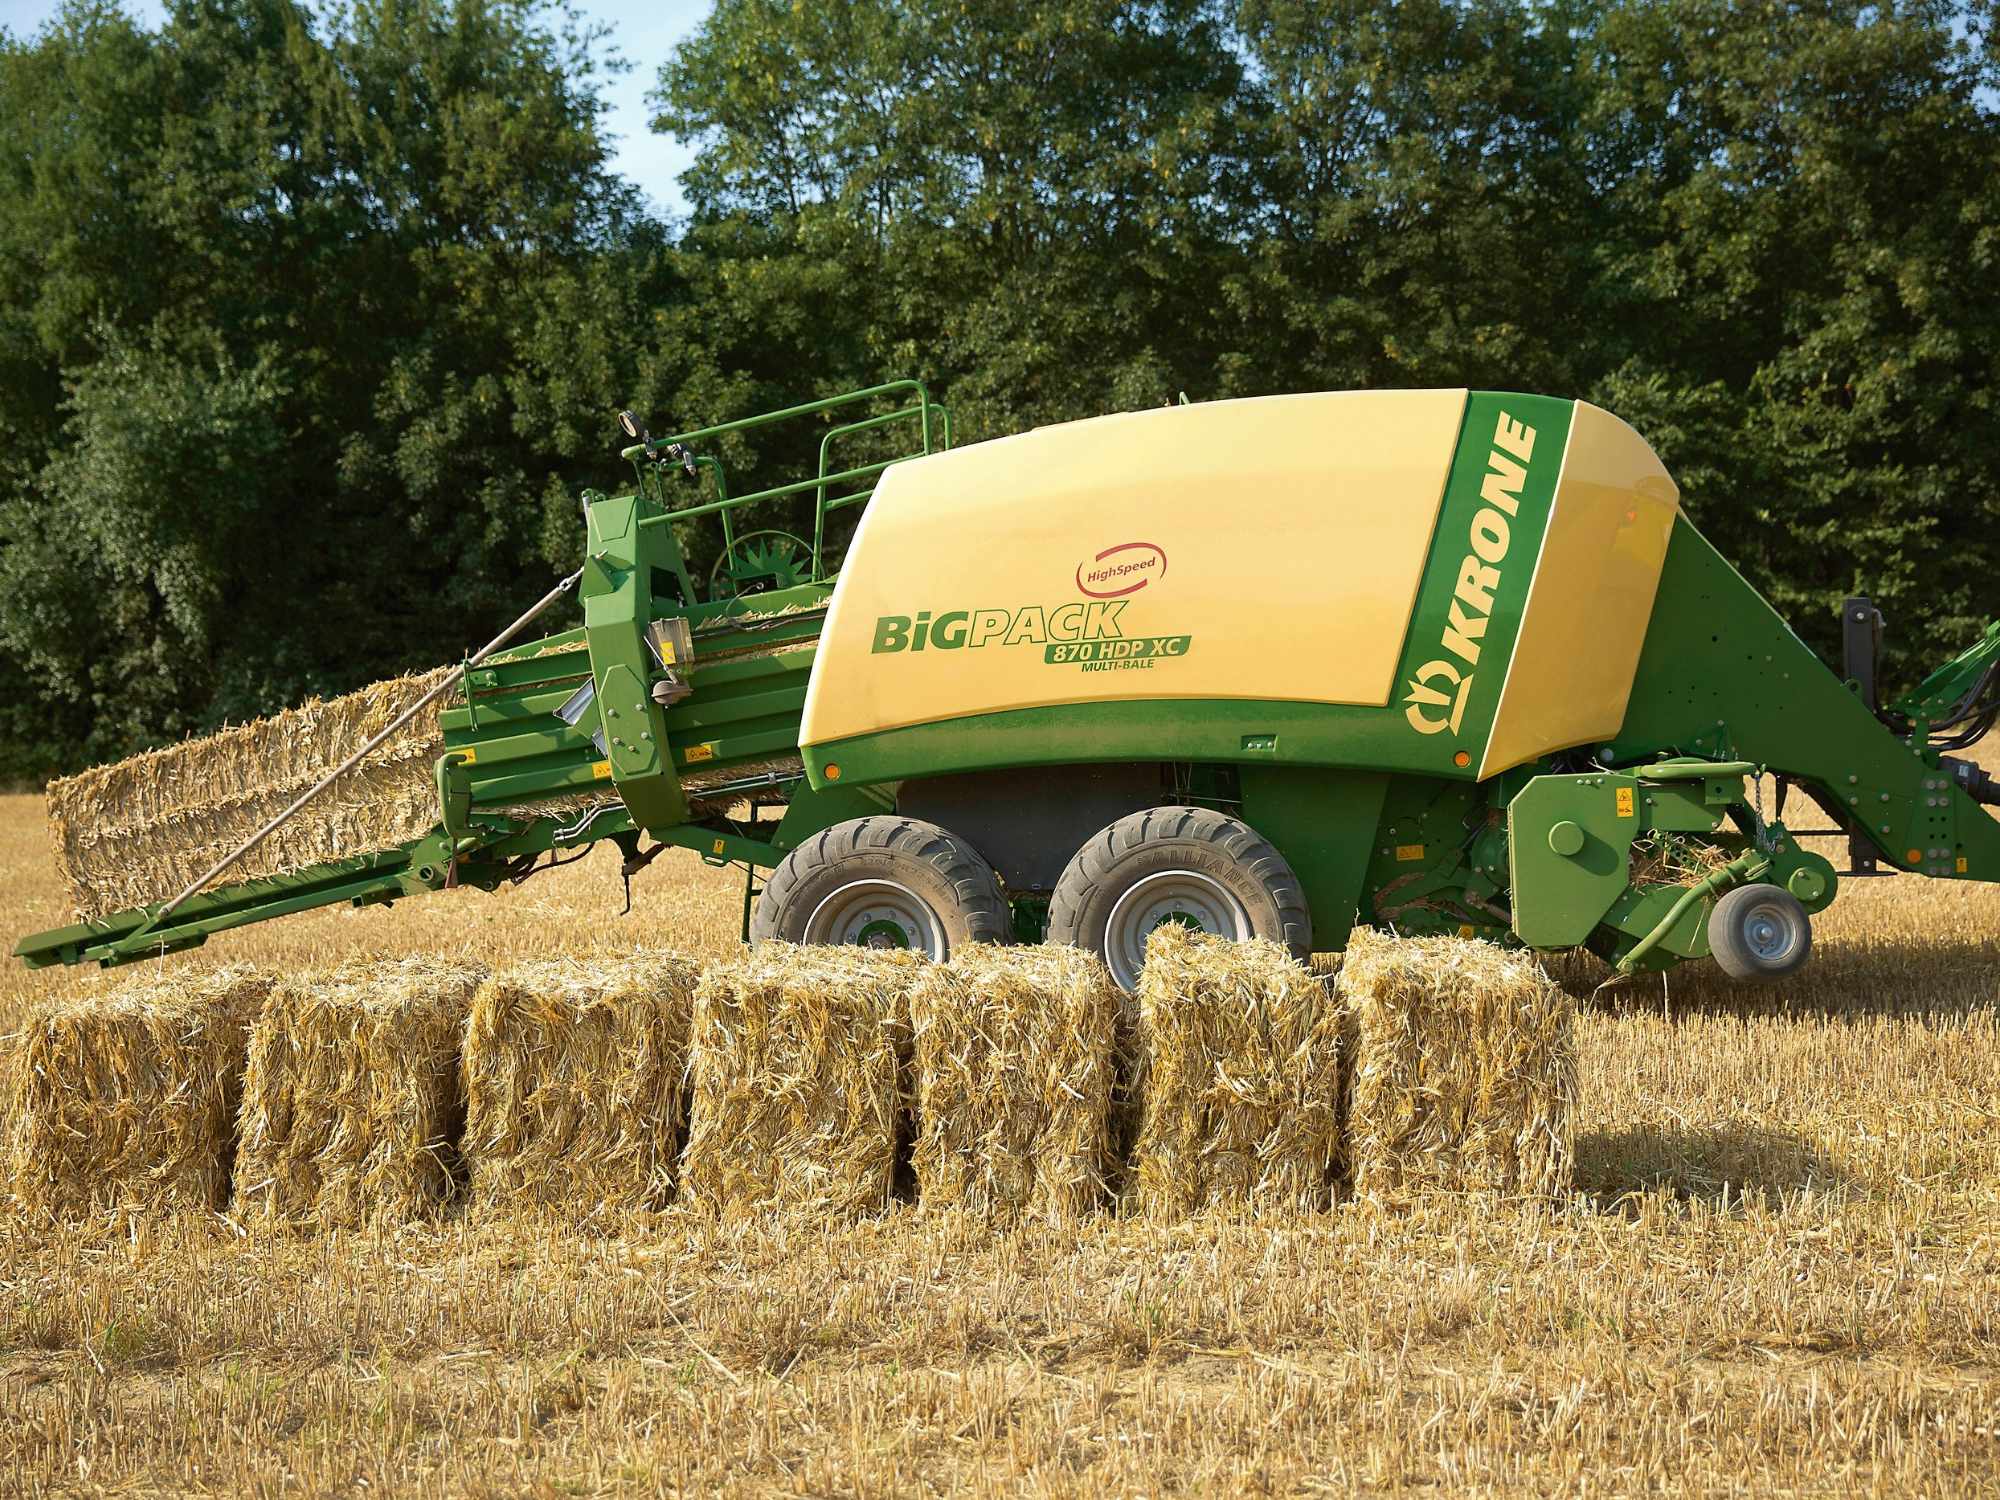 Increase flexibility with small bales within a large bale